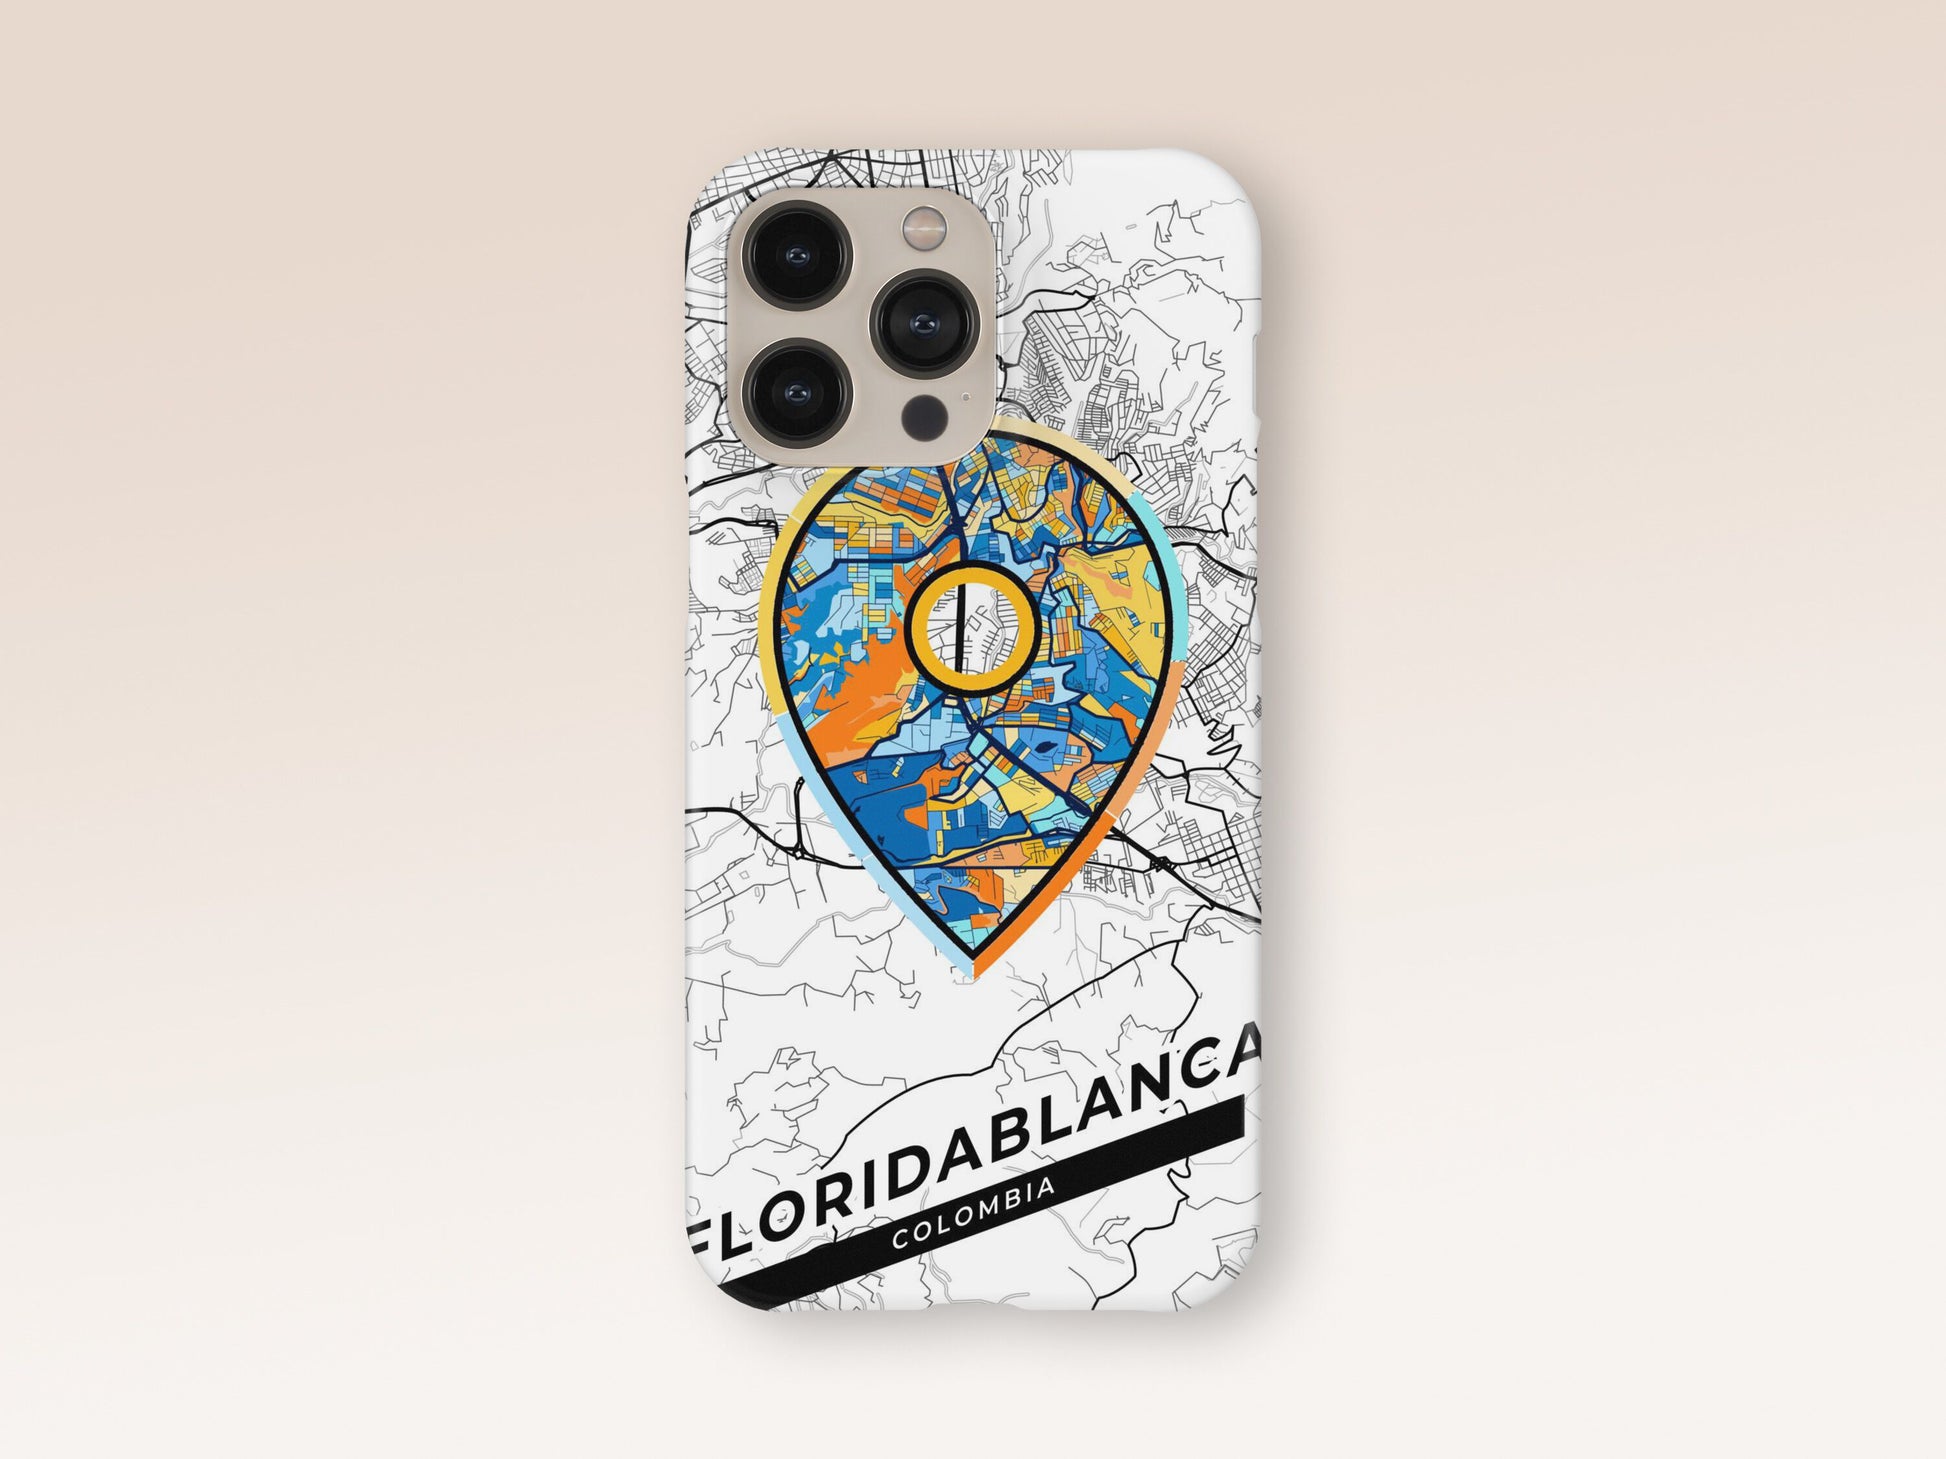 Floridablanca Colombia slim phone case with colorful icon. Birthday, wedding or housewarming gift. Couple match cases. 1